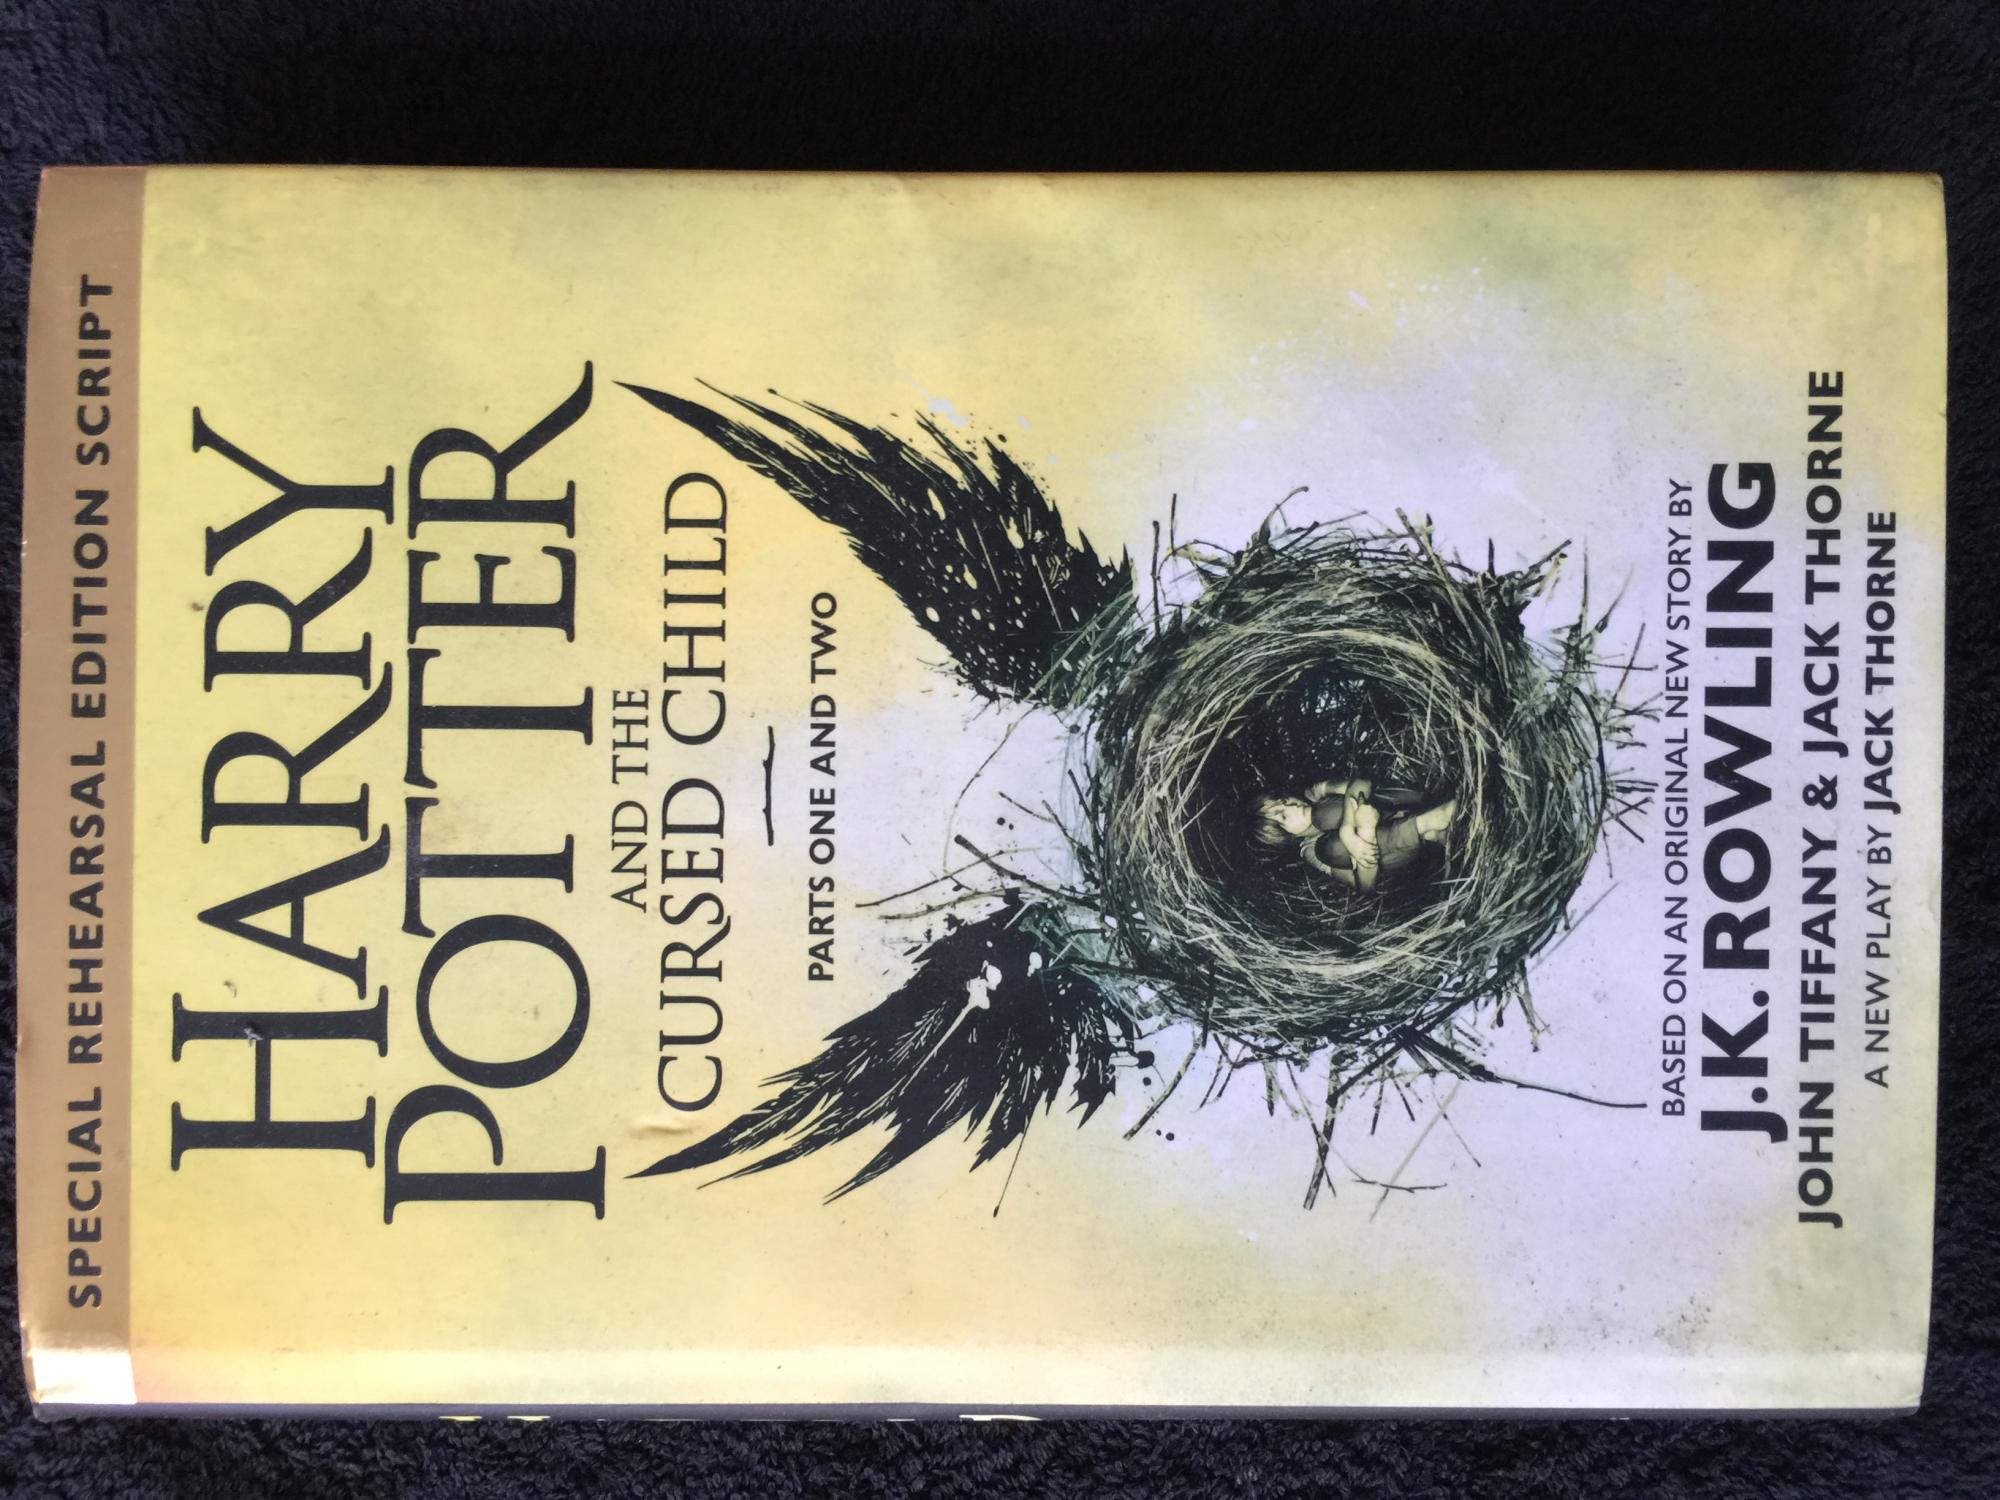 Scholastic Harry Potter and the Cursed Child: Parts One and Two Playscript  (Paperback) - by J. K. Rowling & John Tiffany & Jack Thorne 1 ct